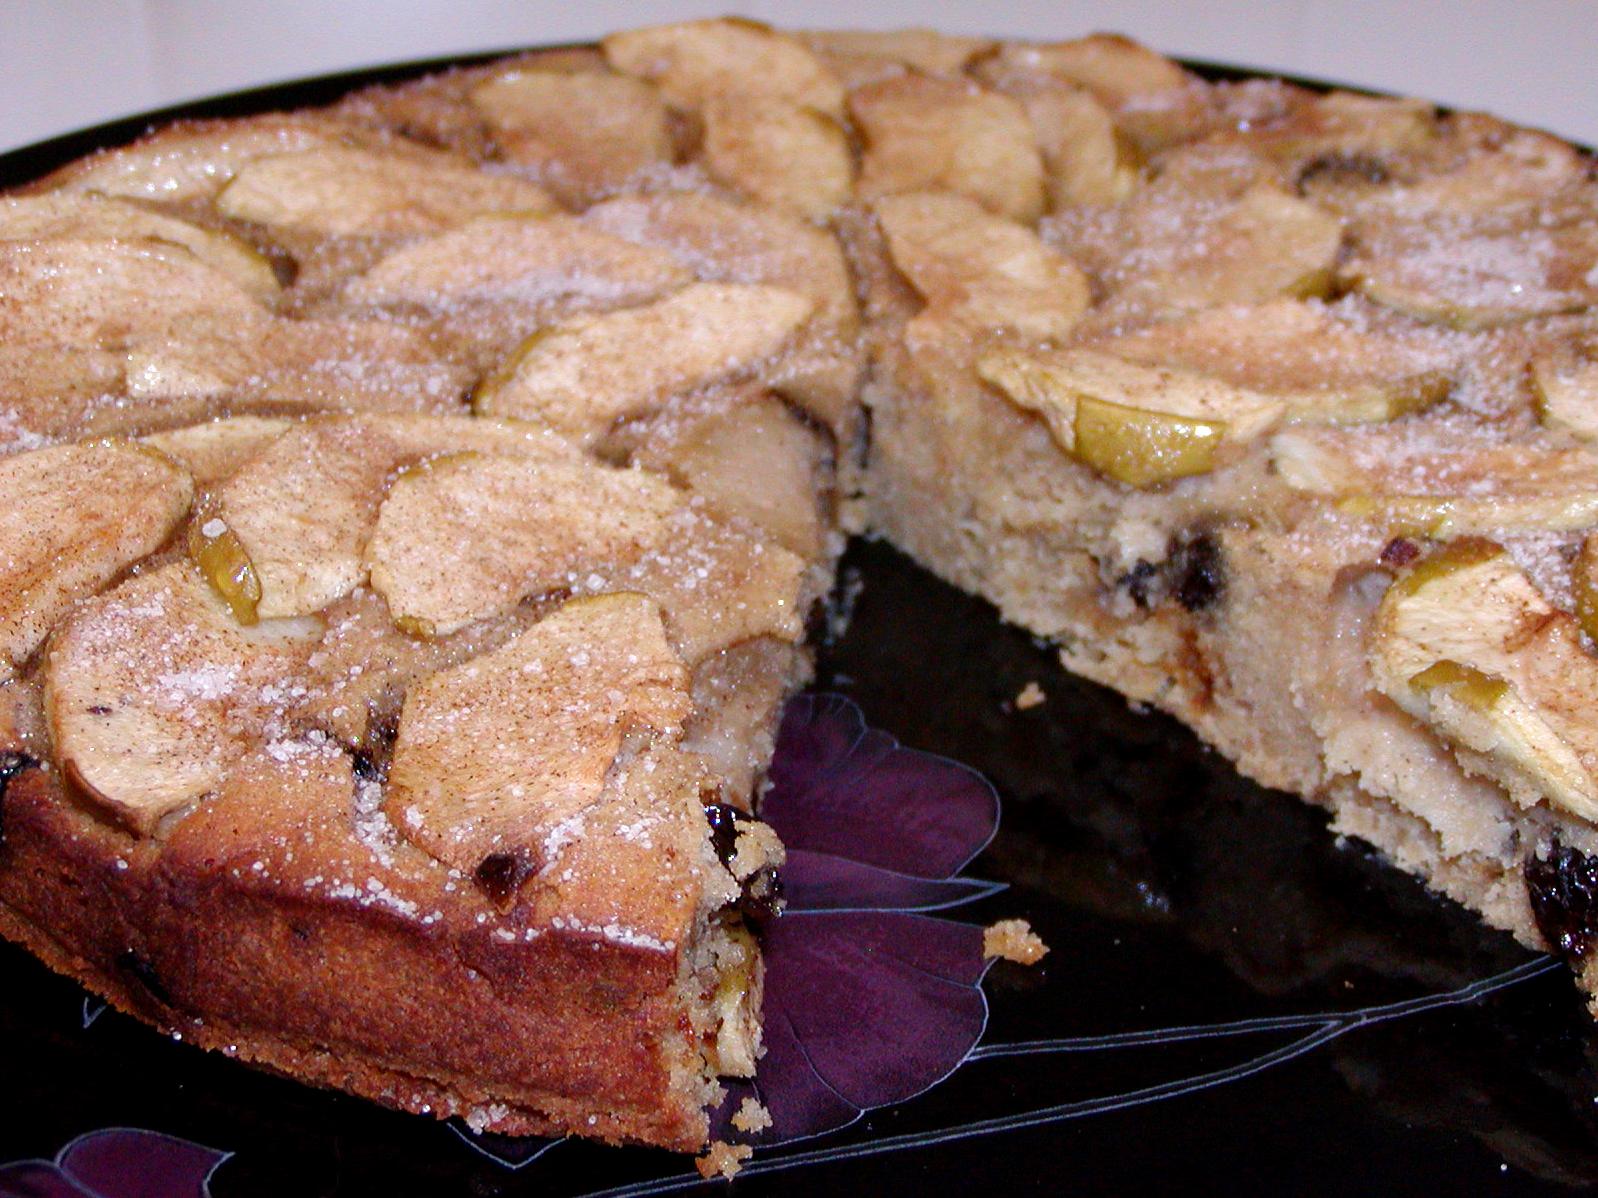  The aroma of cinnamon and apples baking in your kitchen is simply unbeatable.